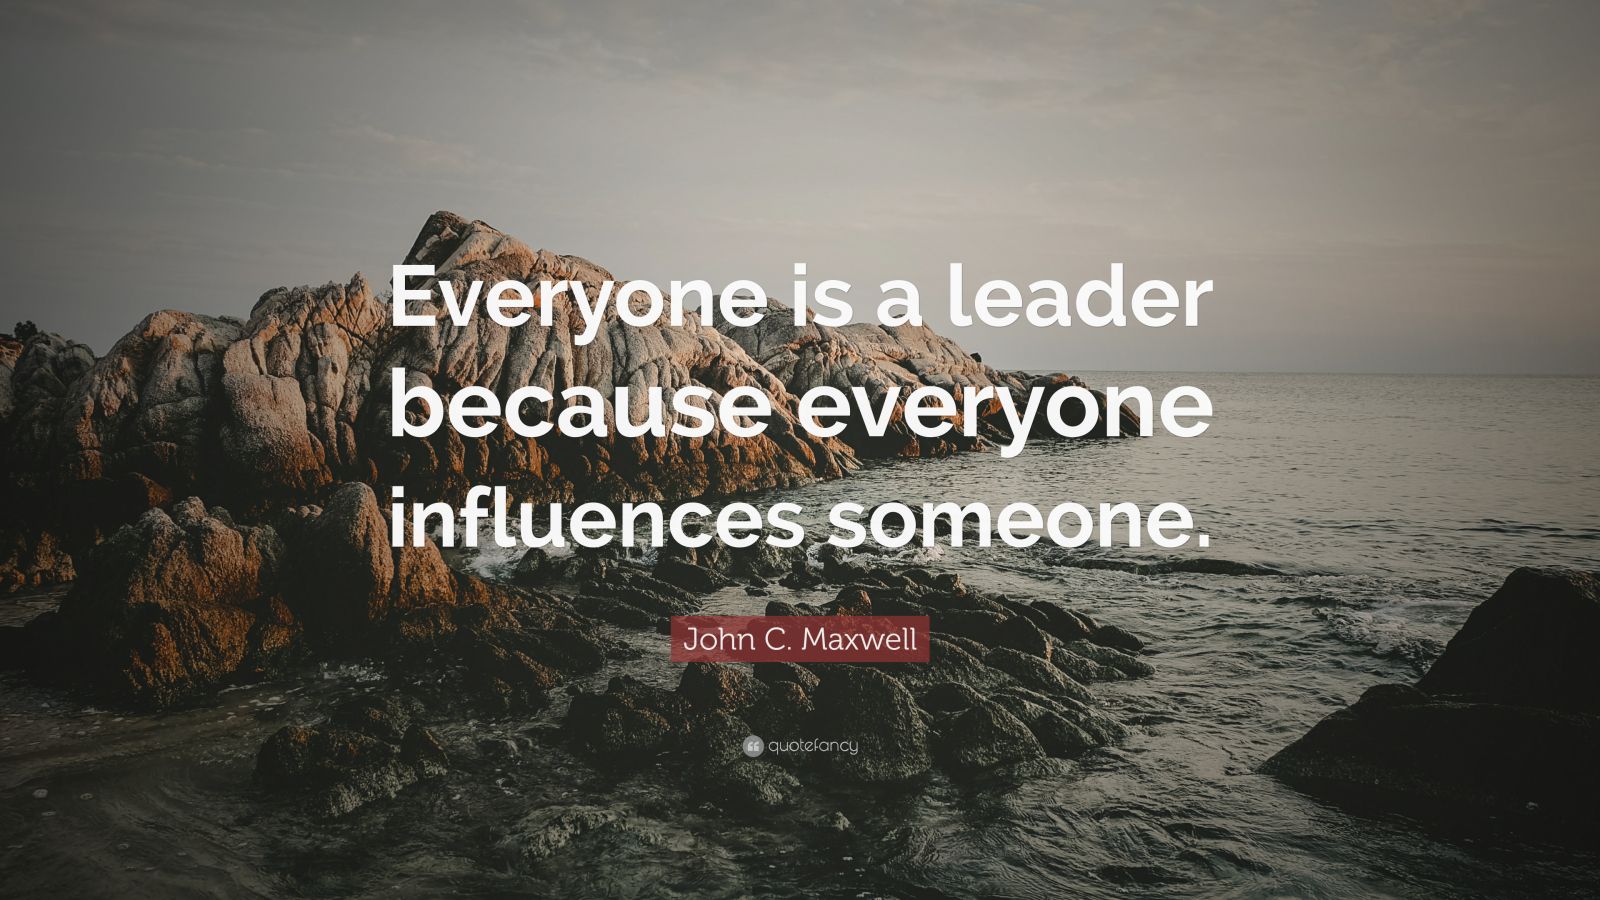 2027290 John C Maxwell Quote Everyone is a leader because everyone